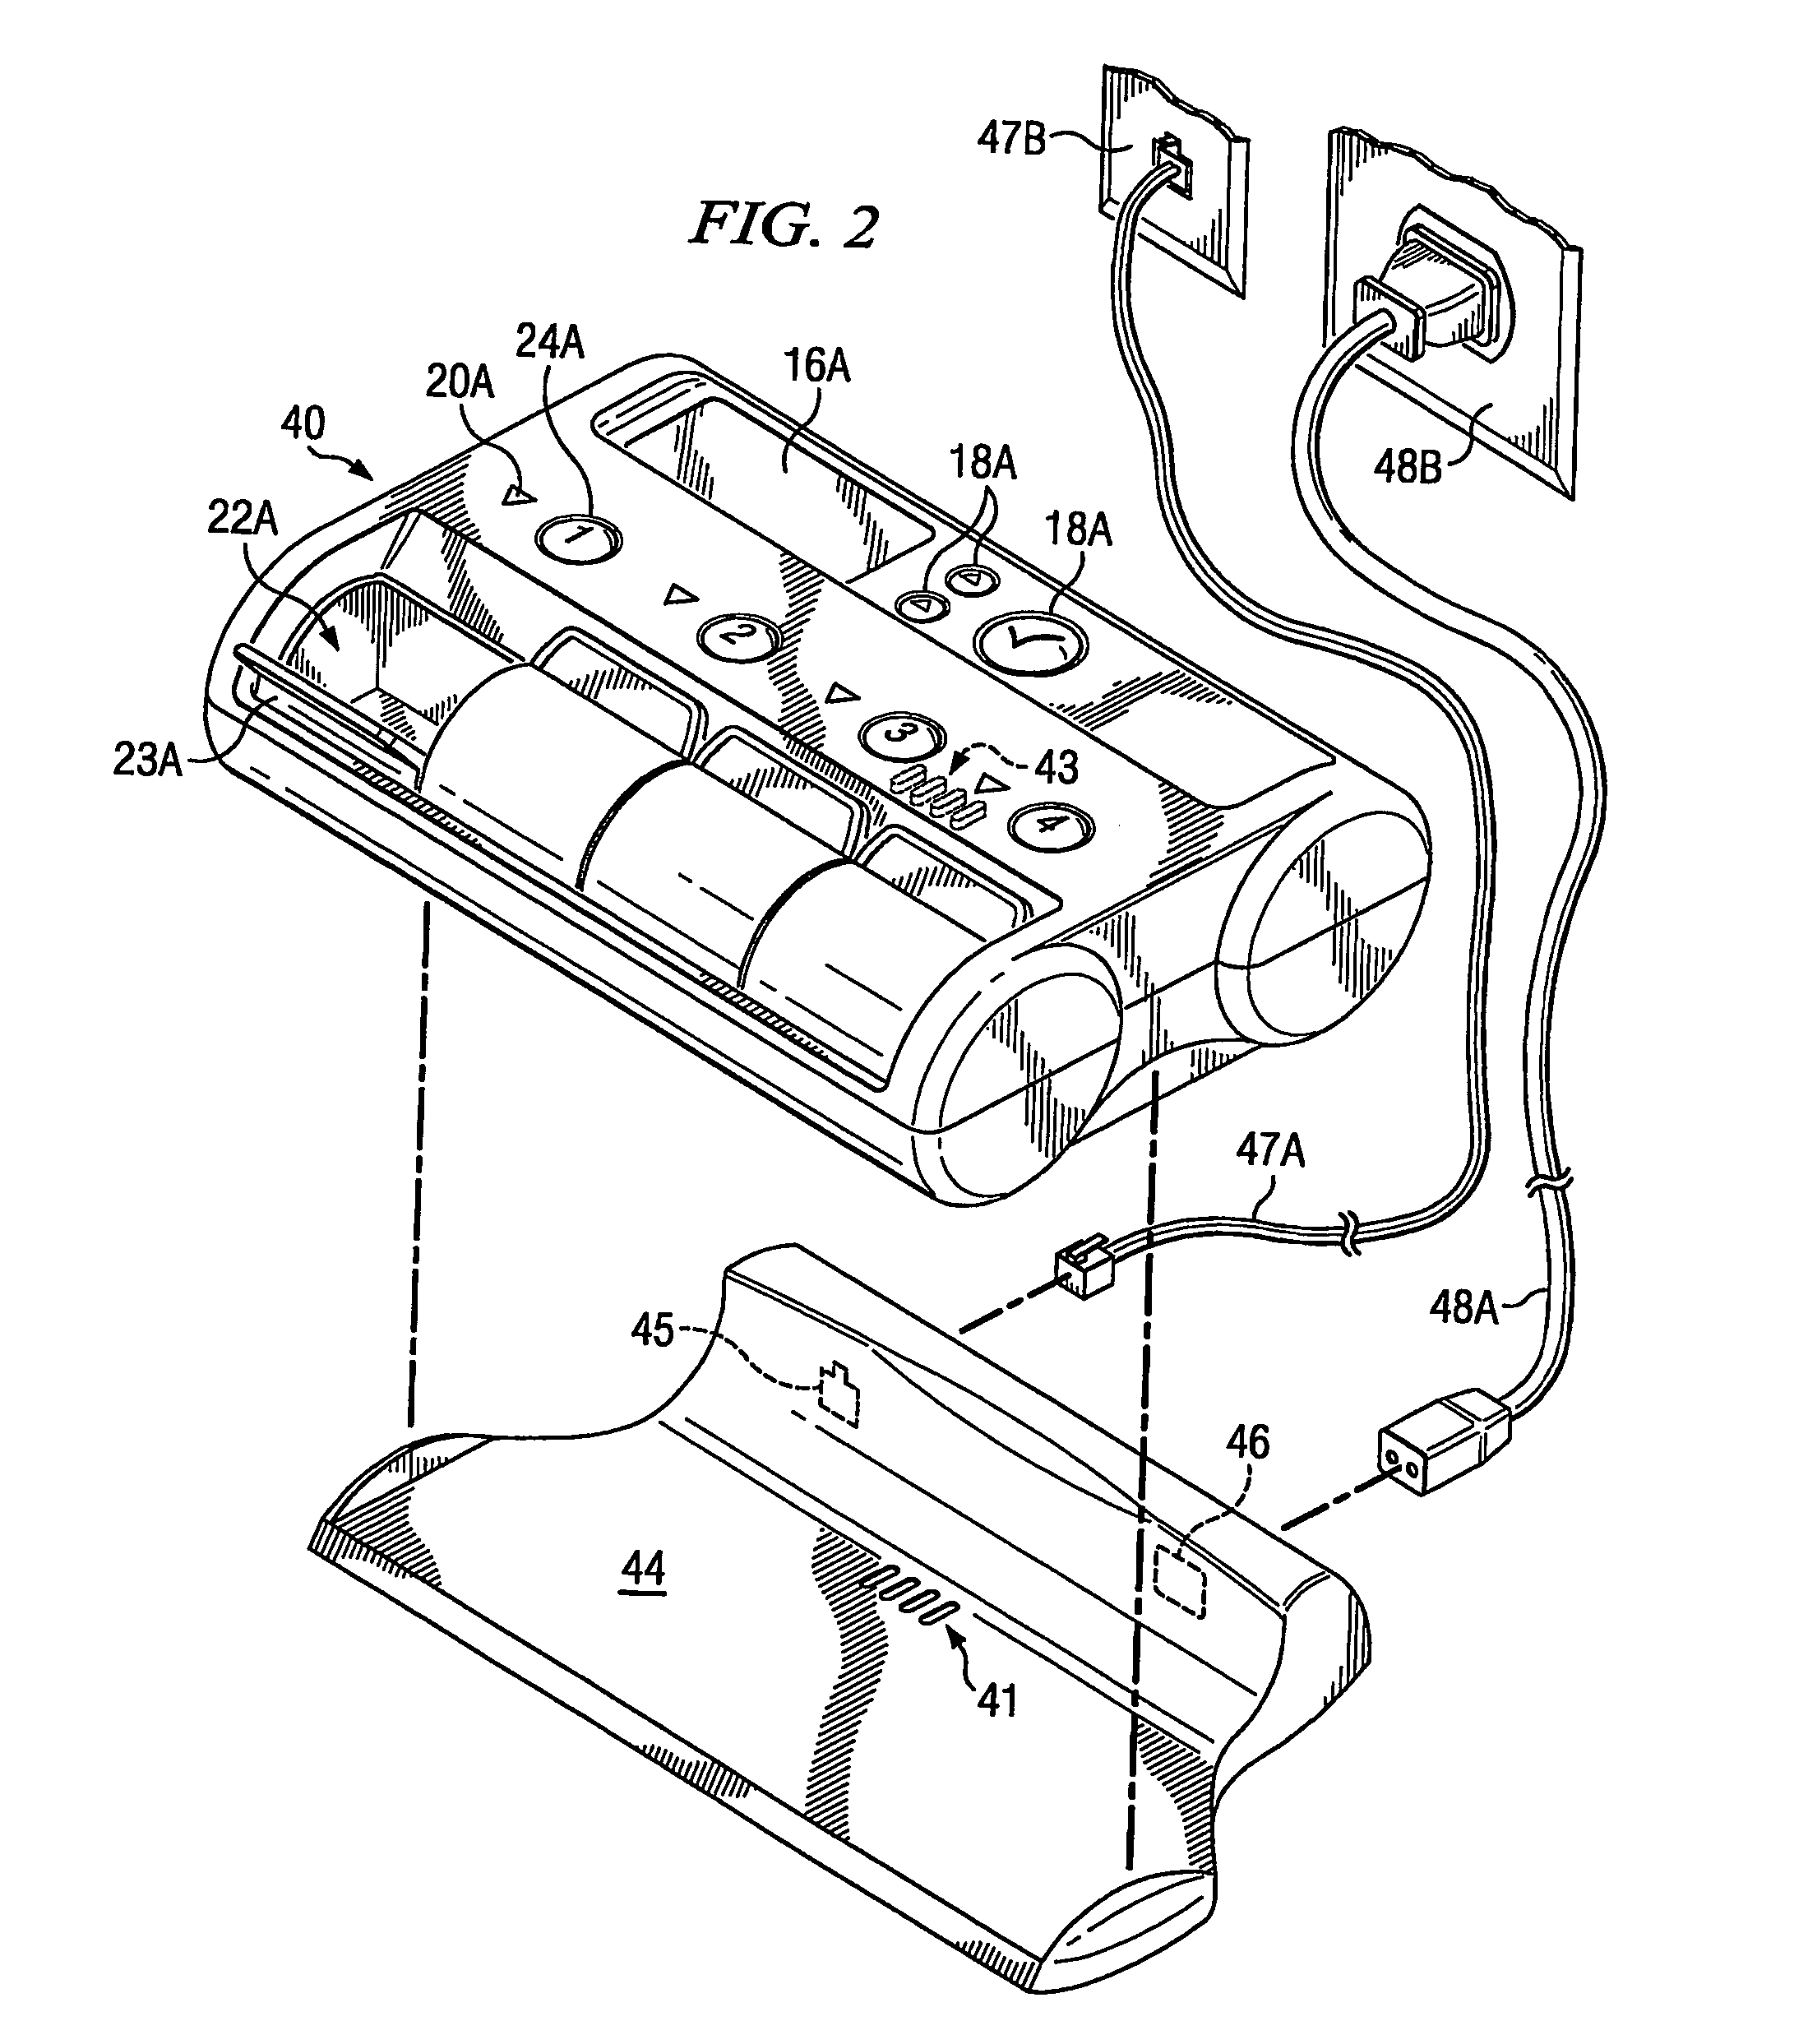 Medication compliance device